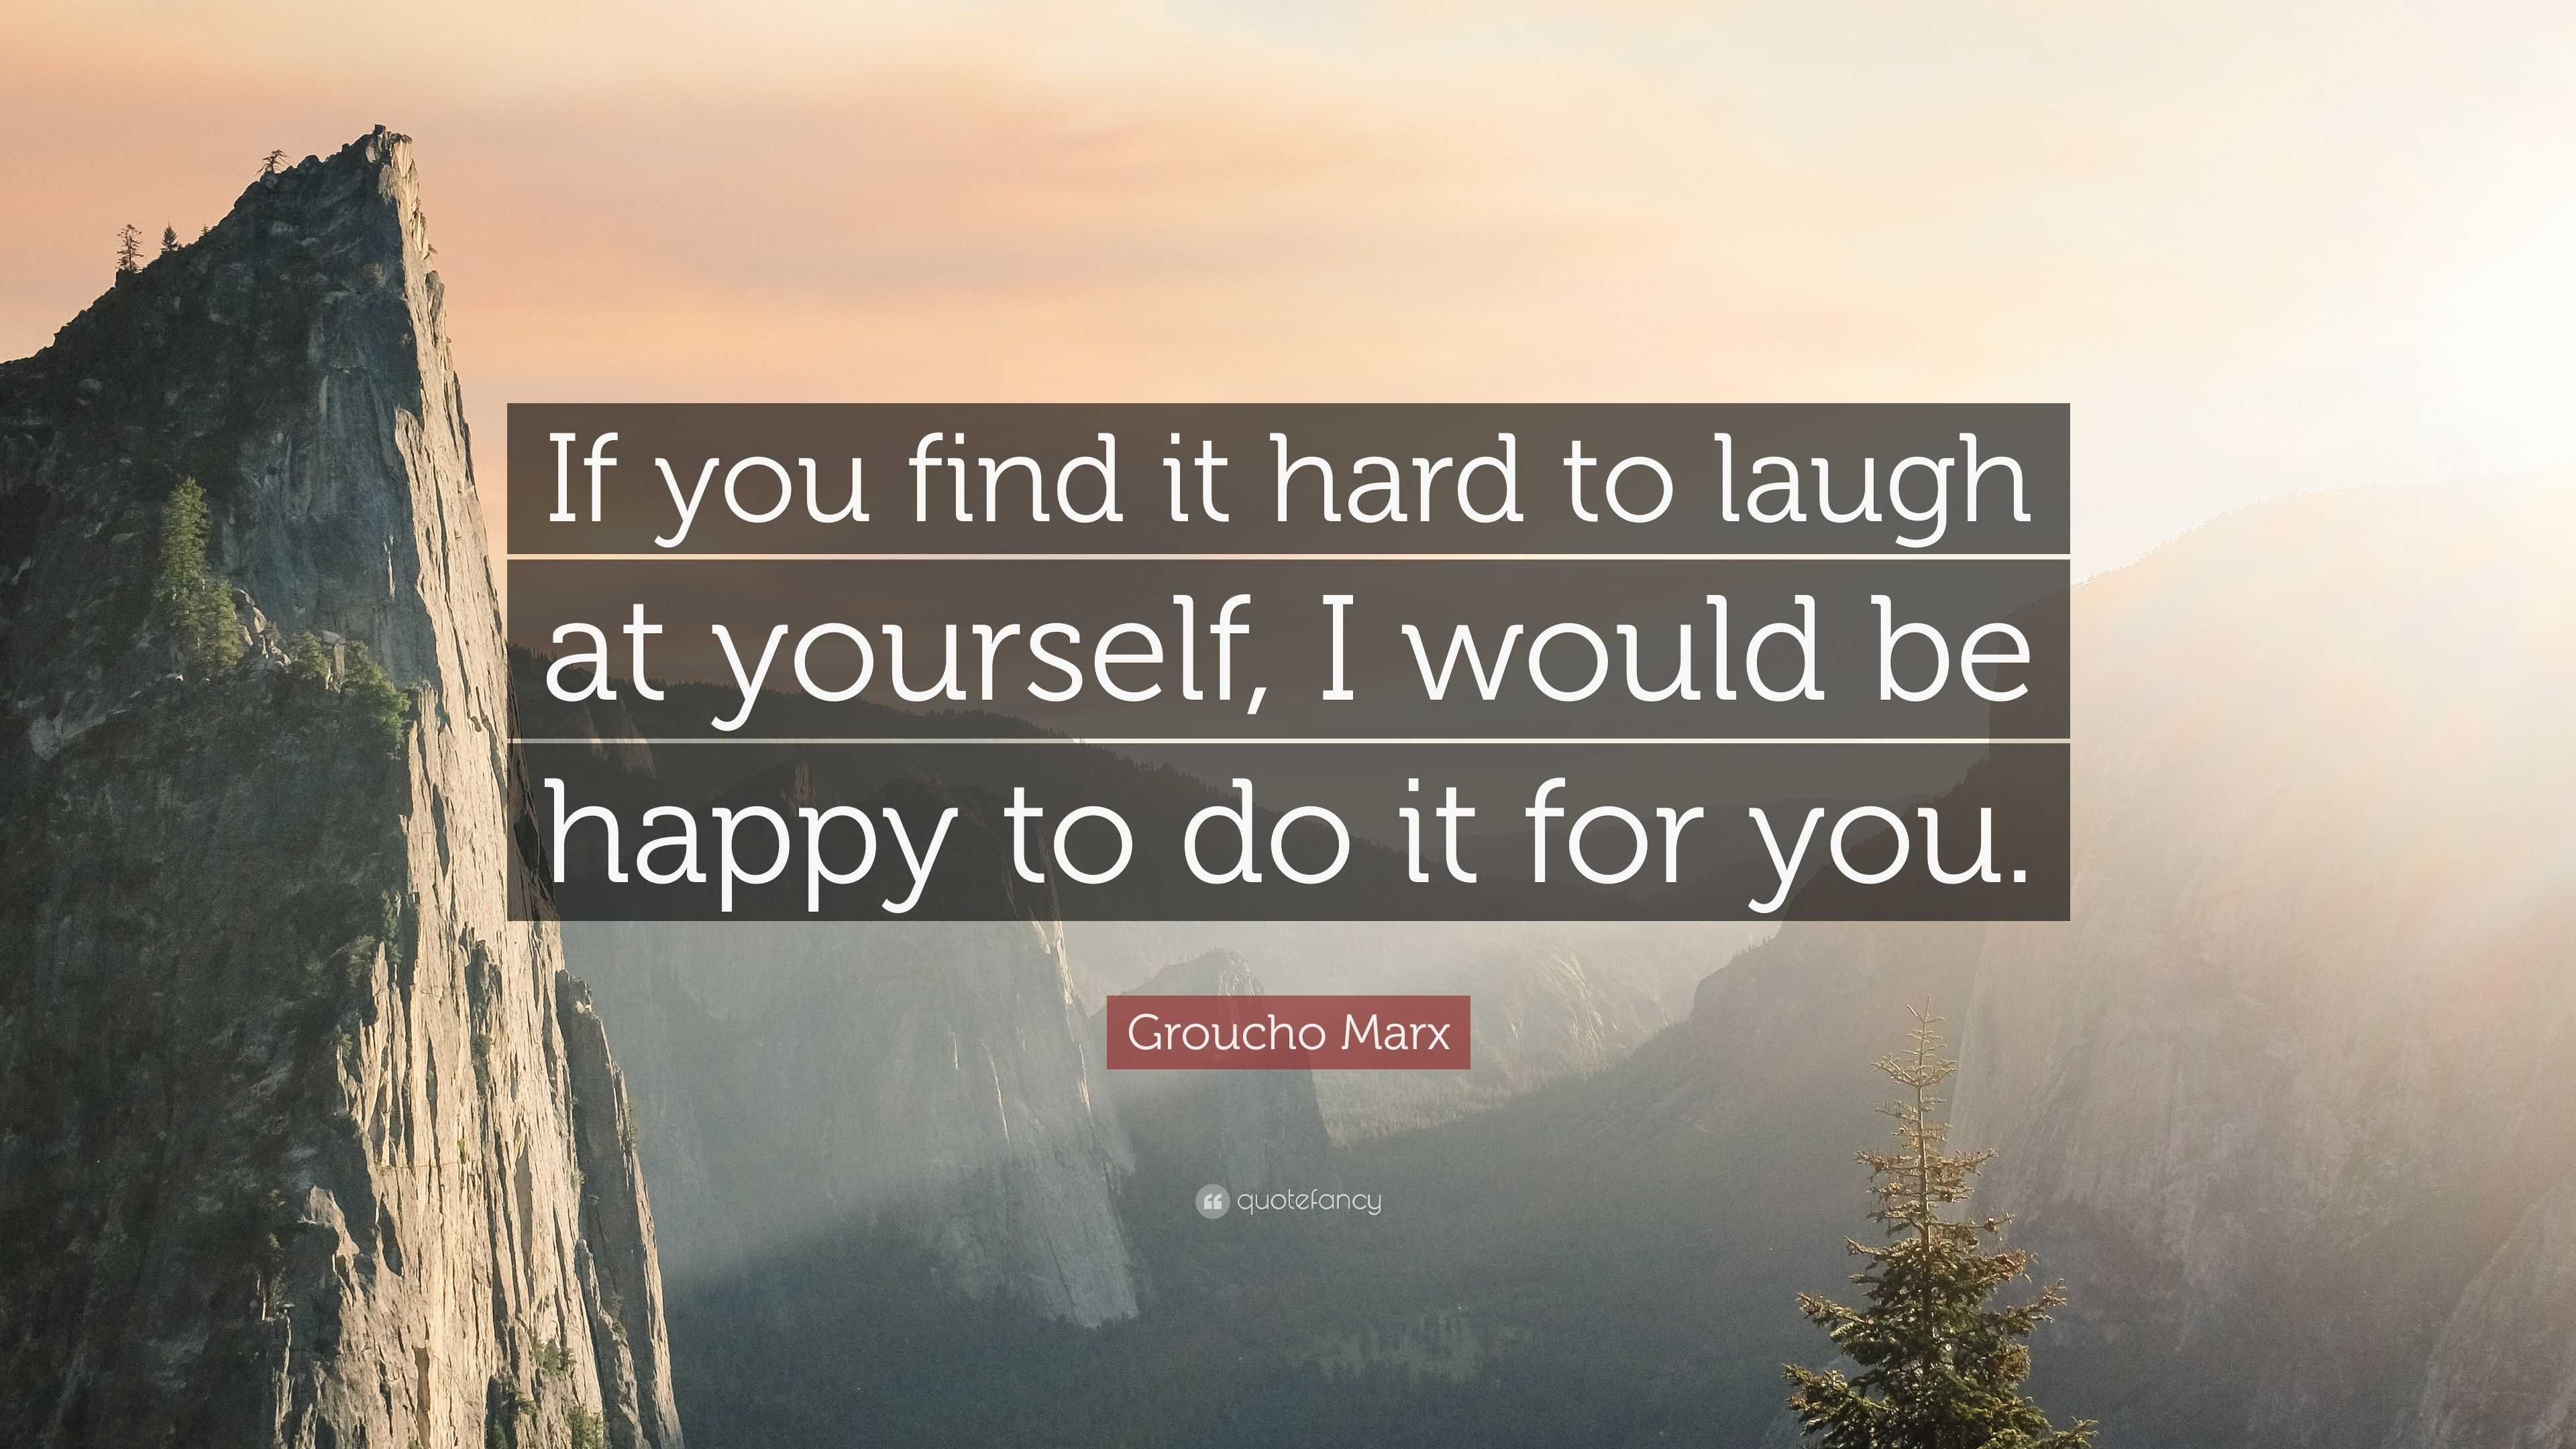 Groucho Marx Quote: “If you find it hard to laugh at yourself, I would ...